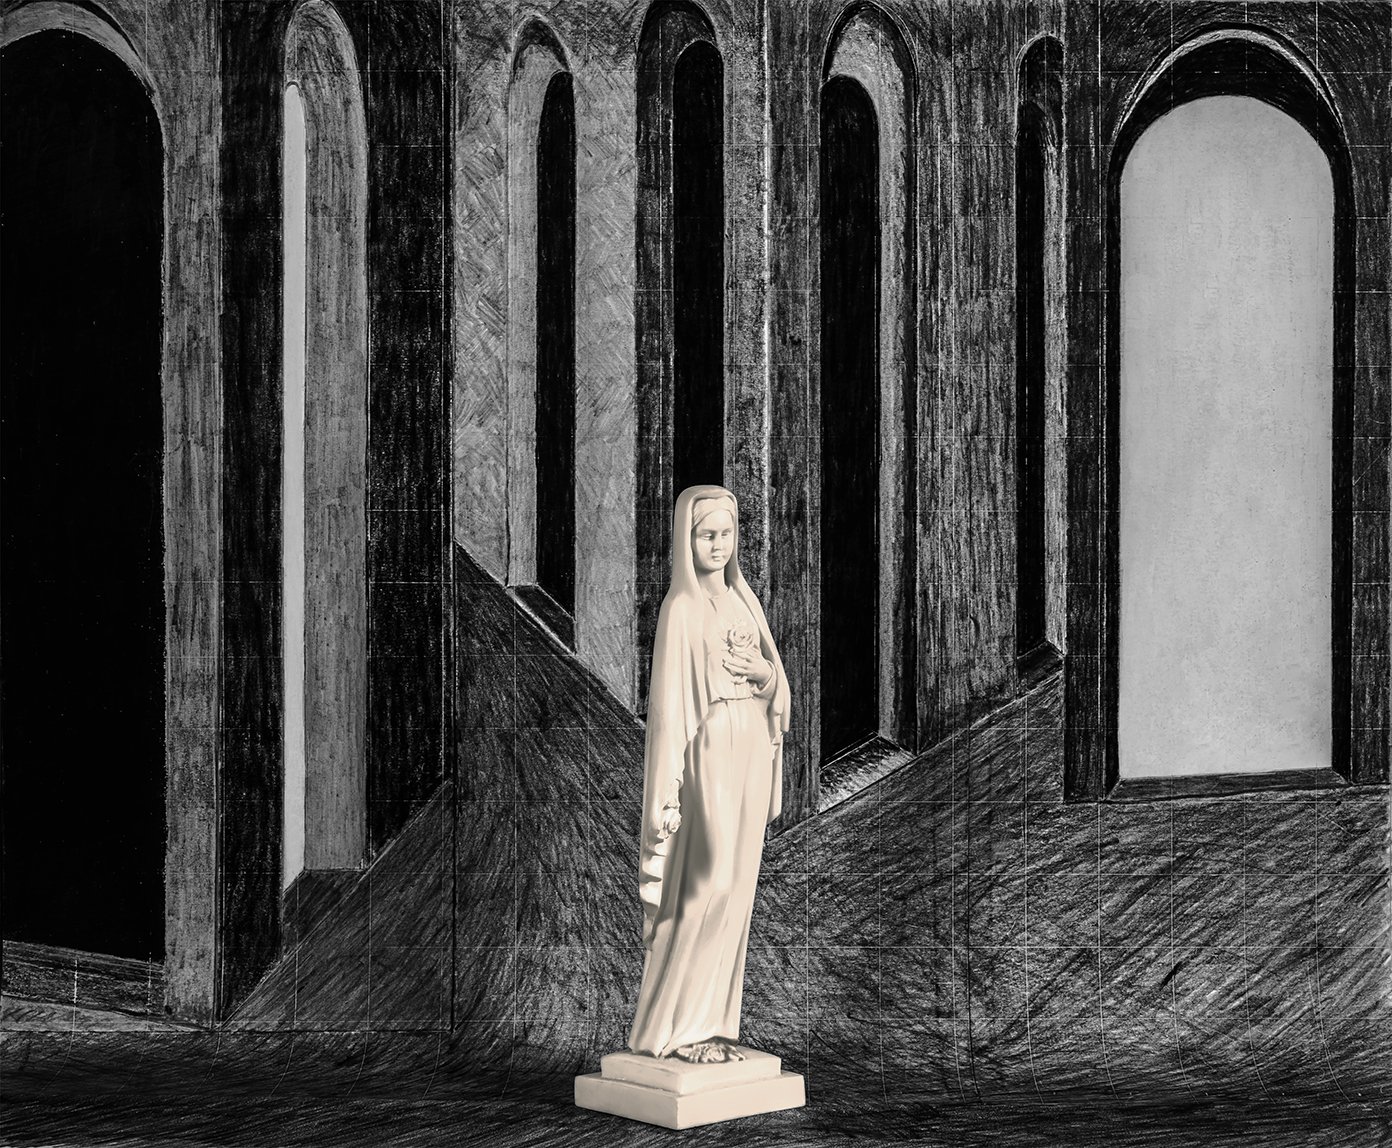    Chance Encounters    Mary in a de Chirico Dream 1 , 2023 (The environment was borrowed from a 1913  painting titled  Le voyage émouvant  by Giorgio  de Chirico) 64cm x 77.5cm Archival pigment print  on 310gsm cotton rag 